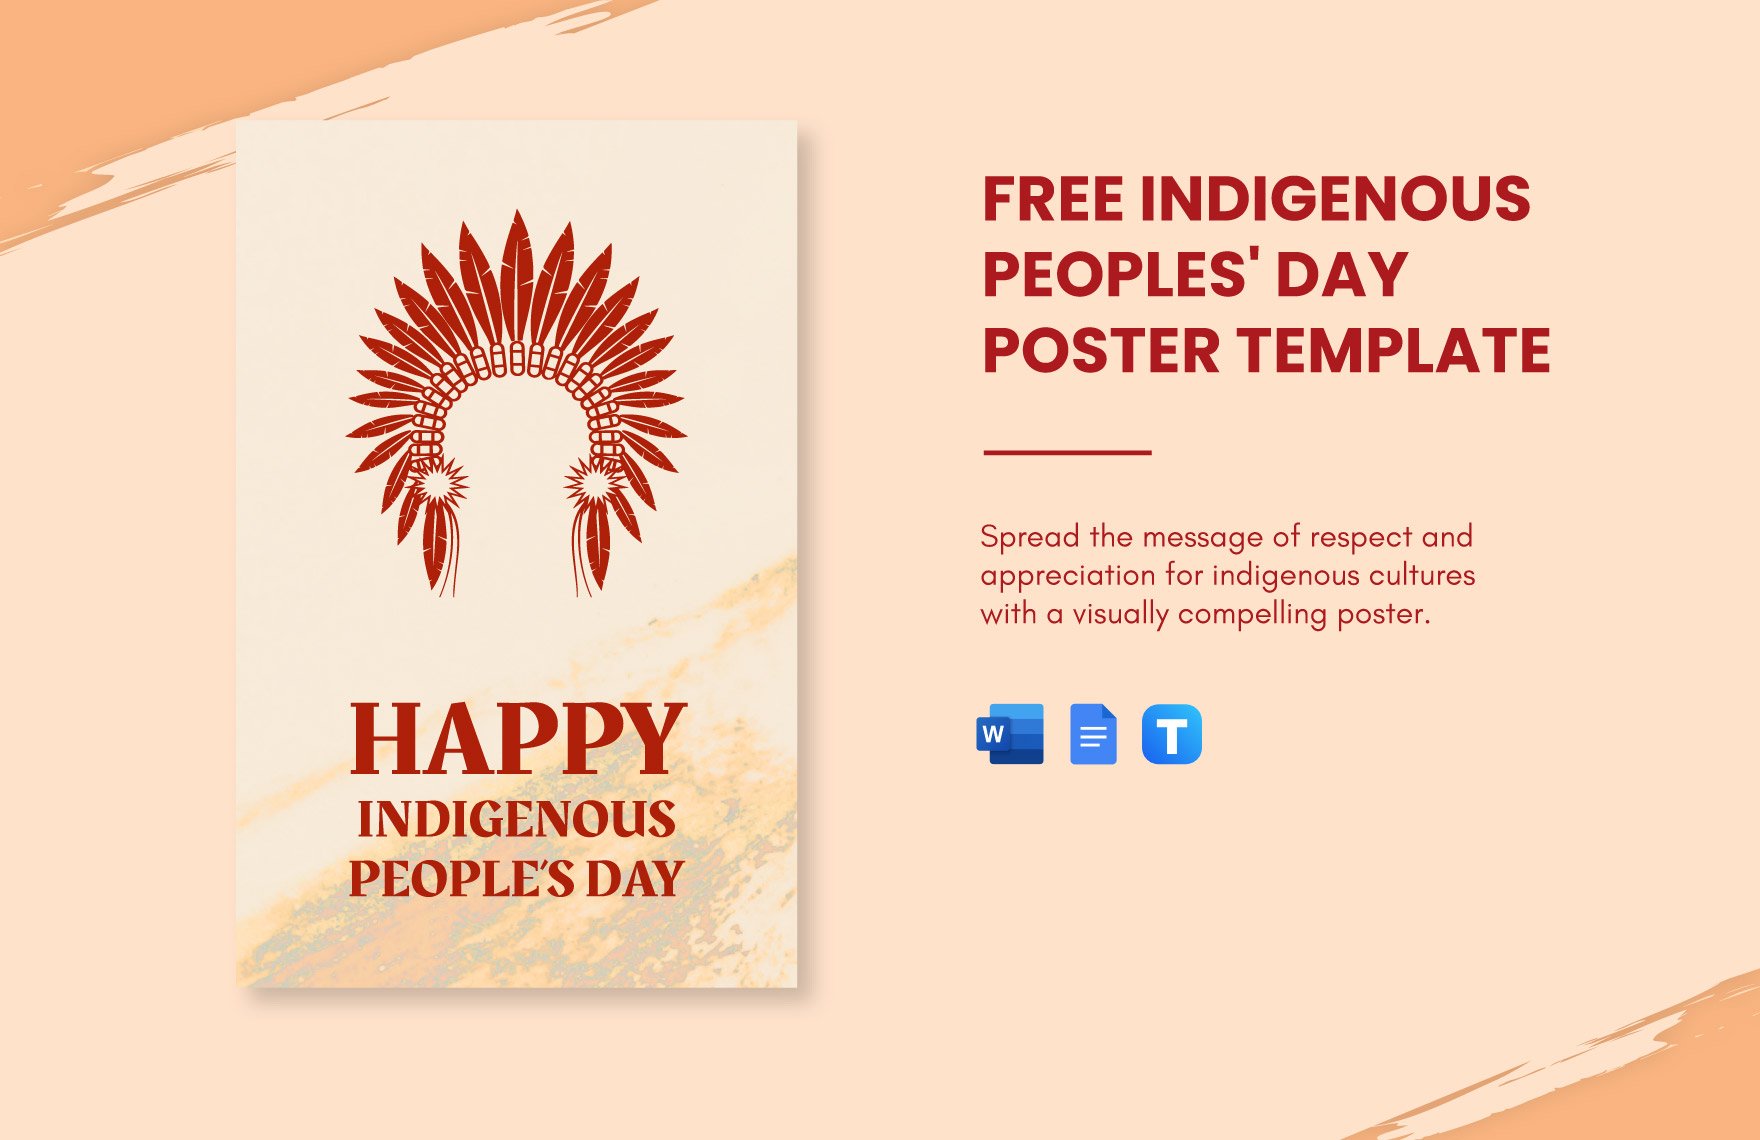 Free Indigenous Peoples' Day Poster Template in Word, Google Docs